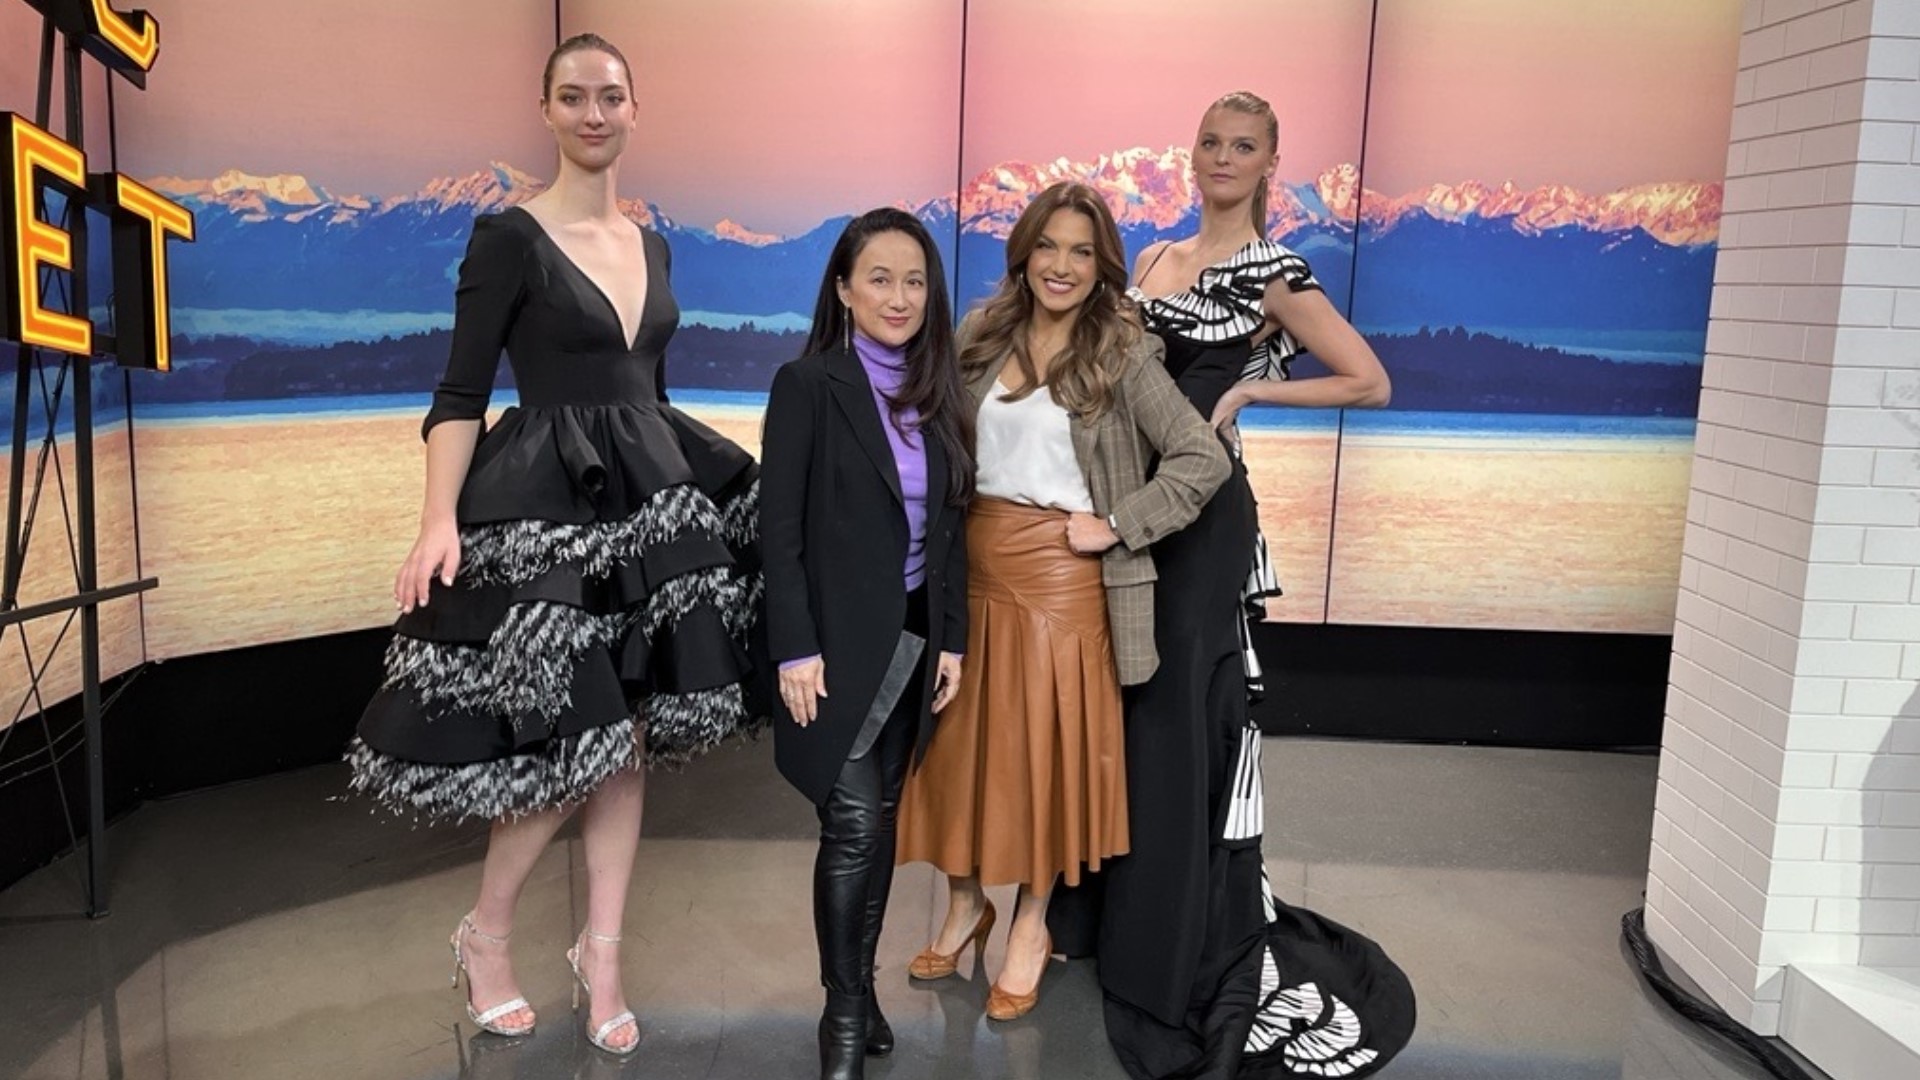 Seattle designer Luly Yang has been designing for 20 years and to celebrate she is hosting a runway show where all the proceeds go to Seattle Children's.